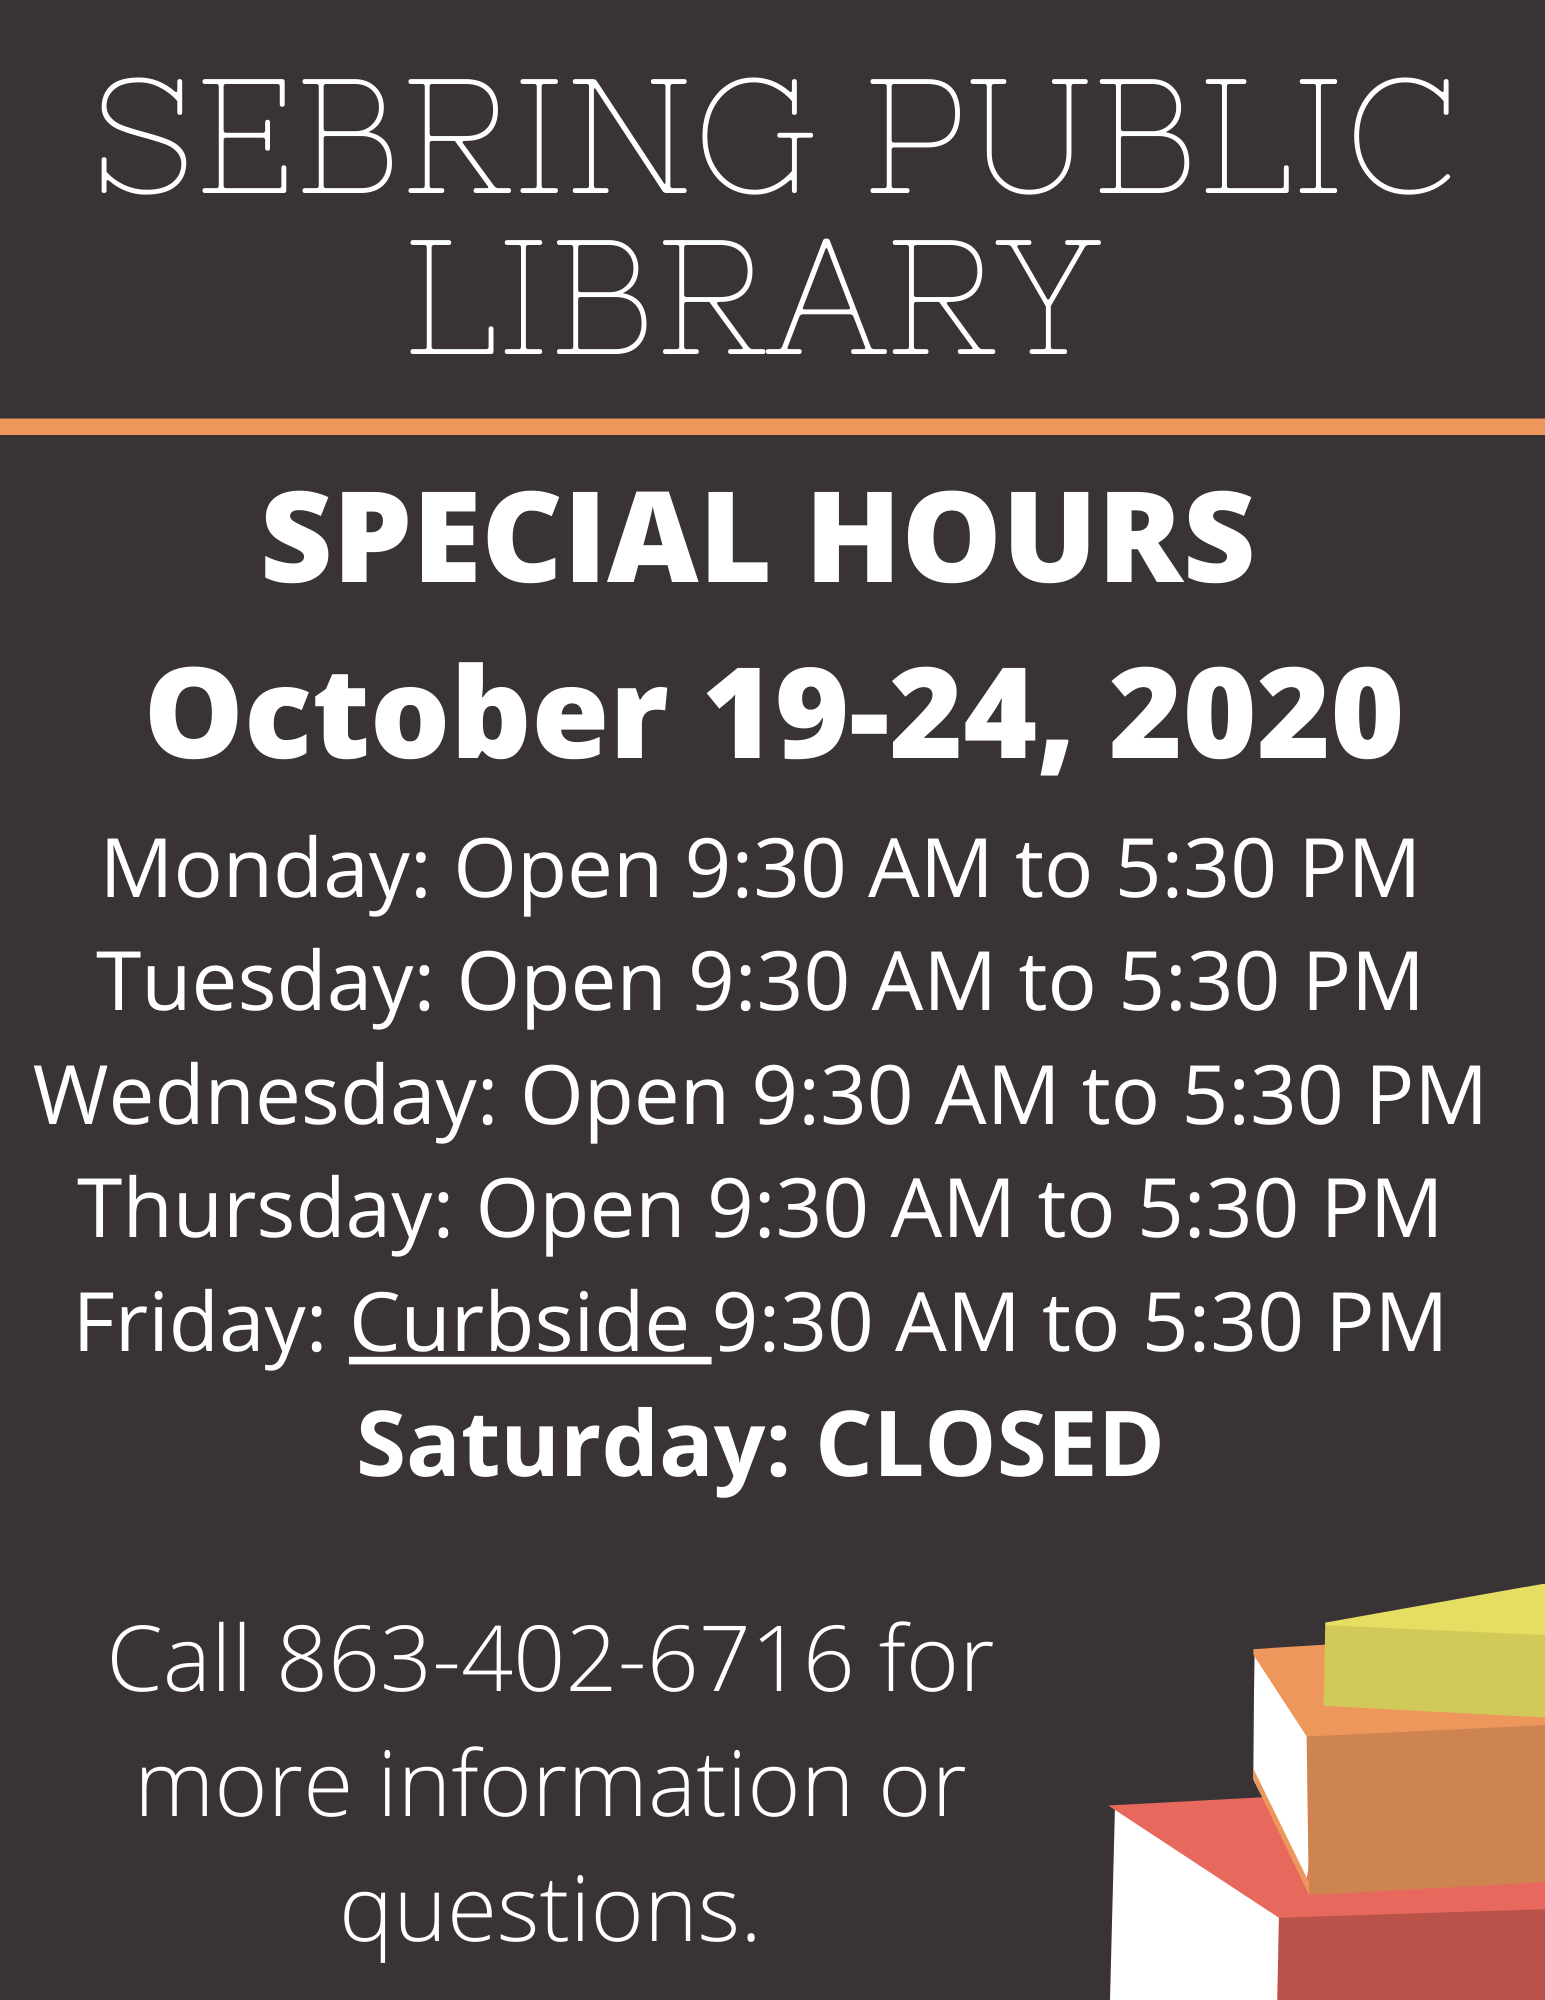 SEBRING PUBLIC LIBRARY PATRONS: The Sebring Public Library only will have adjusted hours for the week of October 19-24, 2020. The library will be open Monday to Thursday from 9:30 AM to 5:30 PM and curbside service will be available on Friday, October 24, 2020 from 9:30 AM to 5:30 PM. For questions, please call 8634026716.